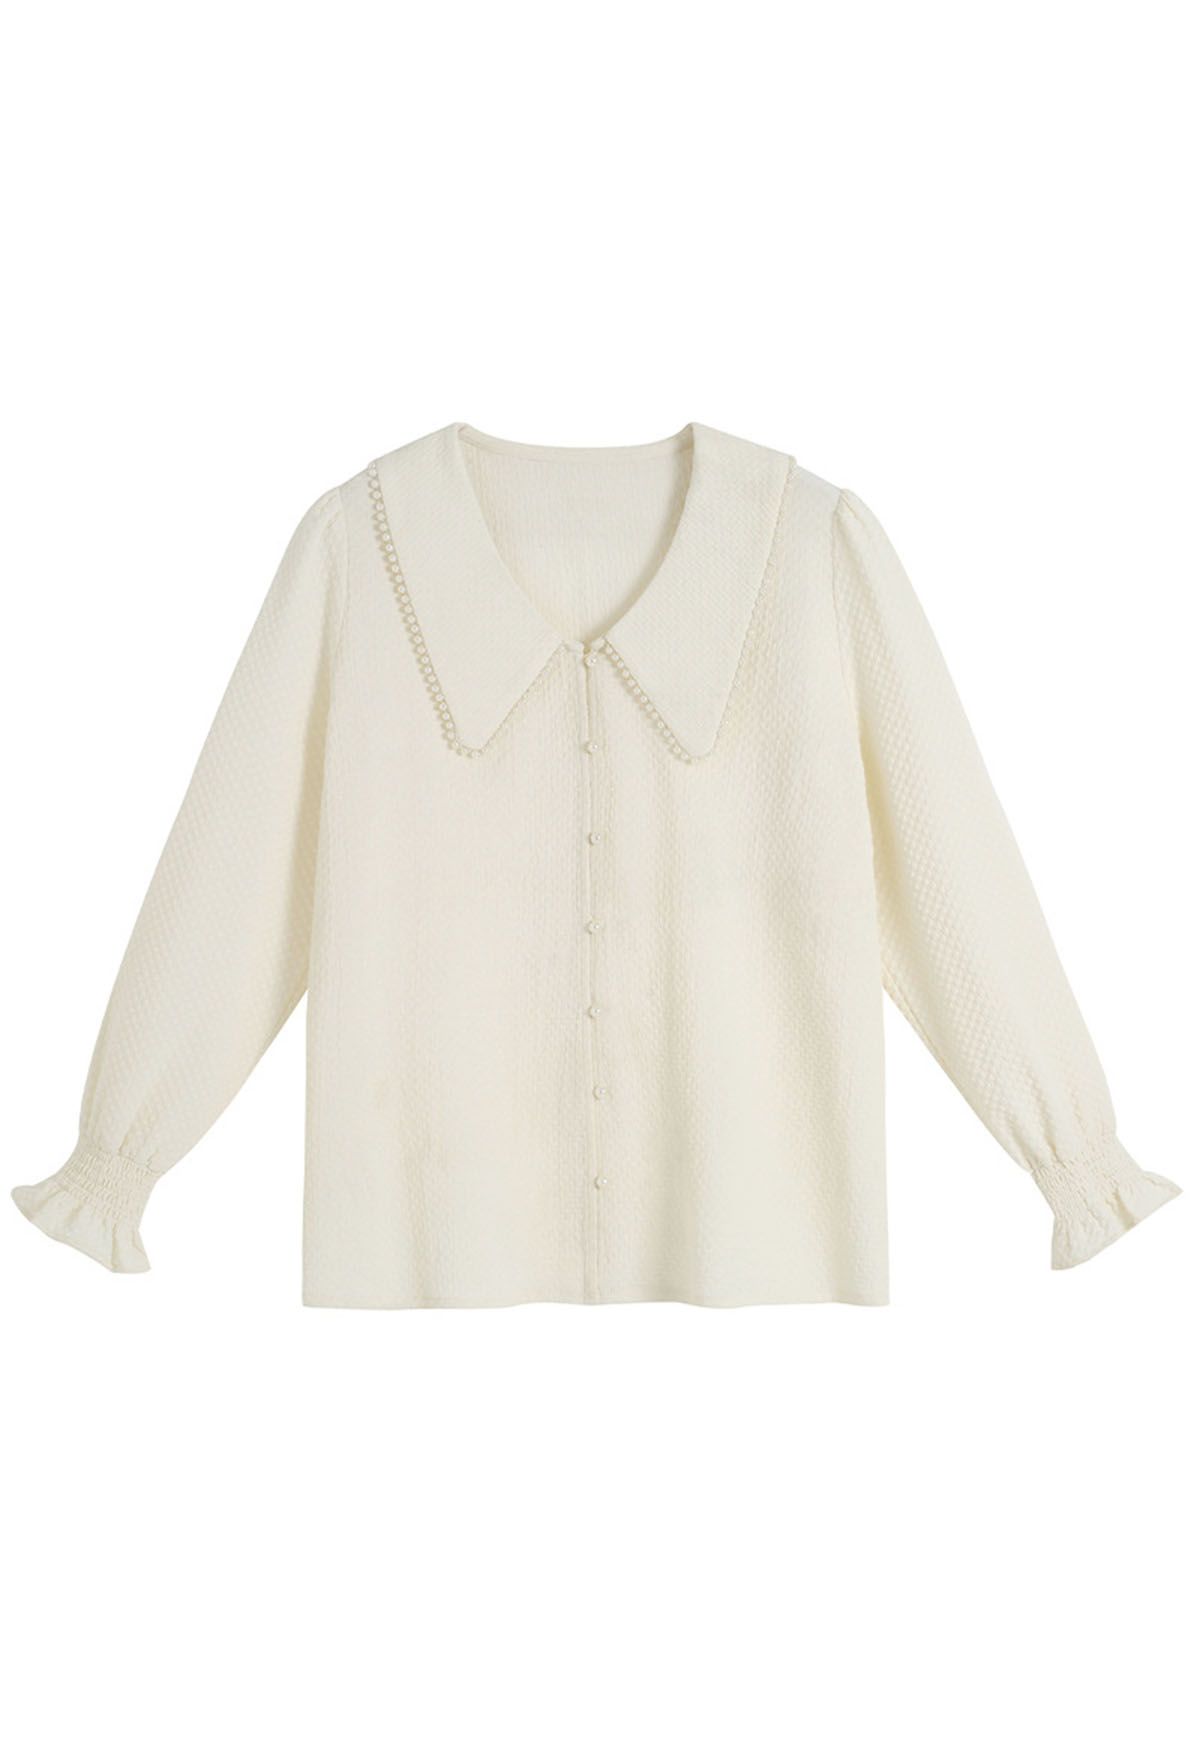 Pearl Doll Collar Embossed Button Down Shirt in Cream